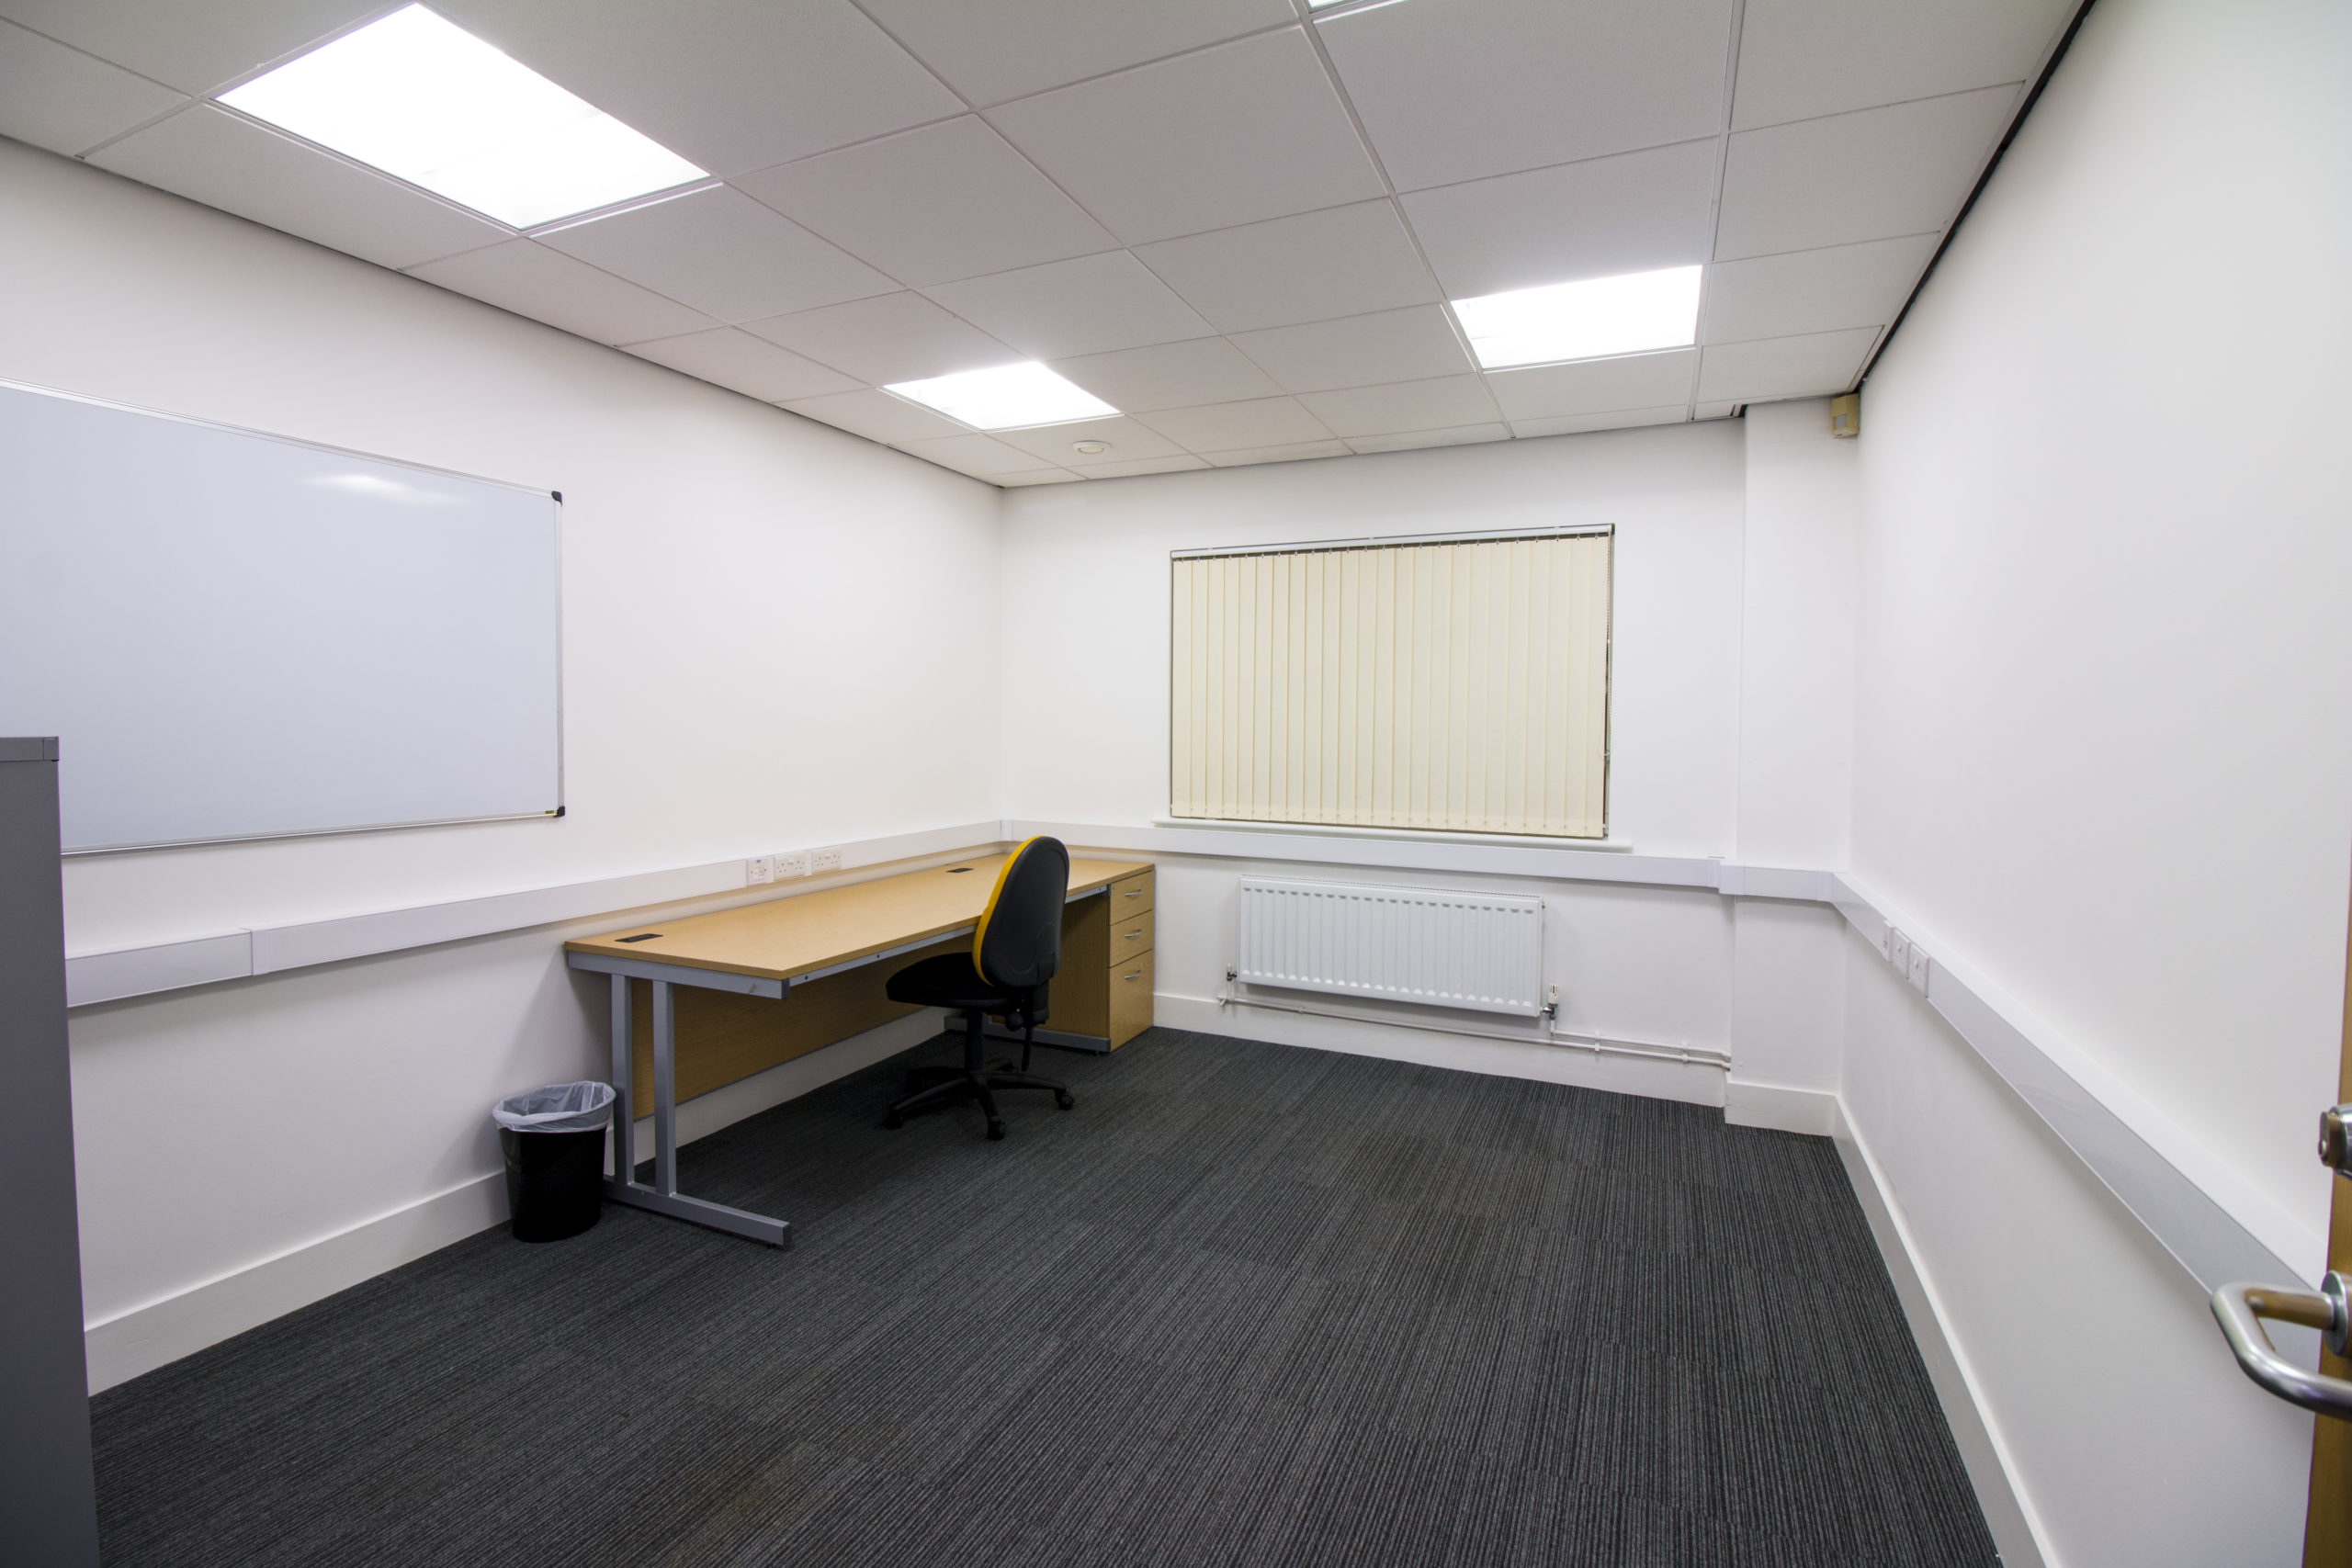 An empty office at 13 Dudley Street in Grimsby, equipped with a desk and a whiteboard.